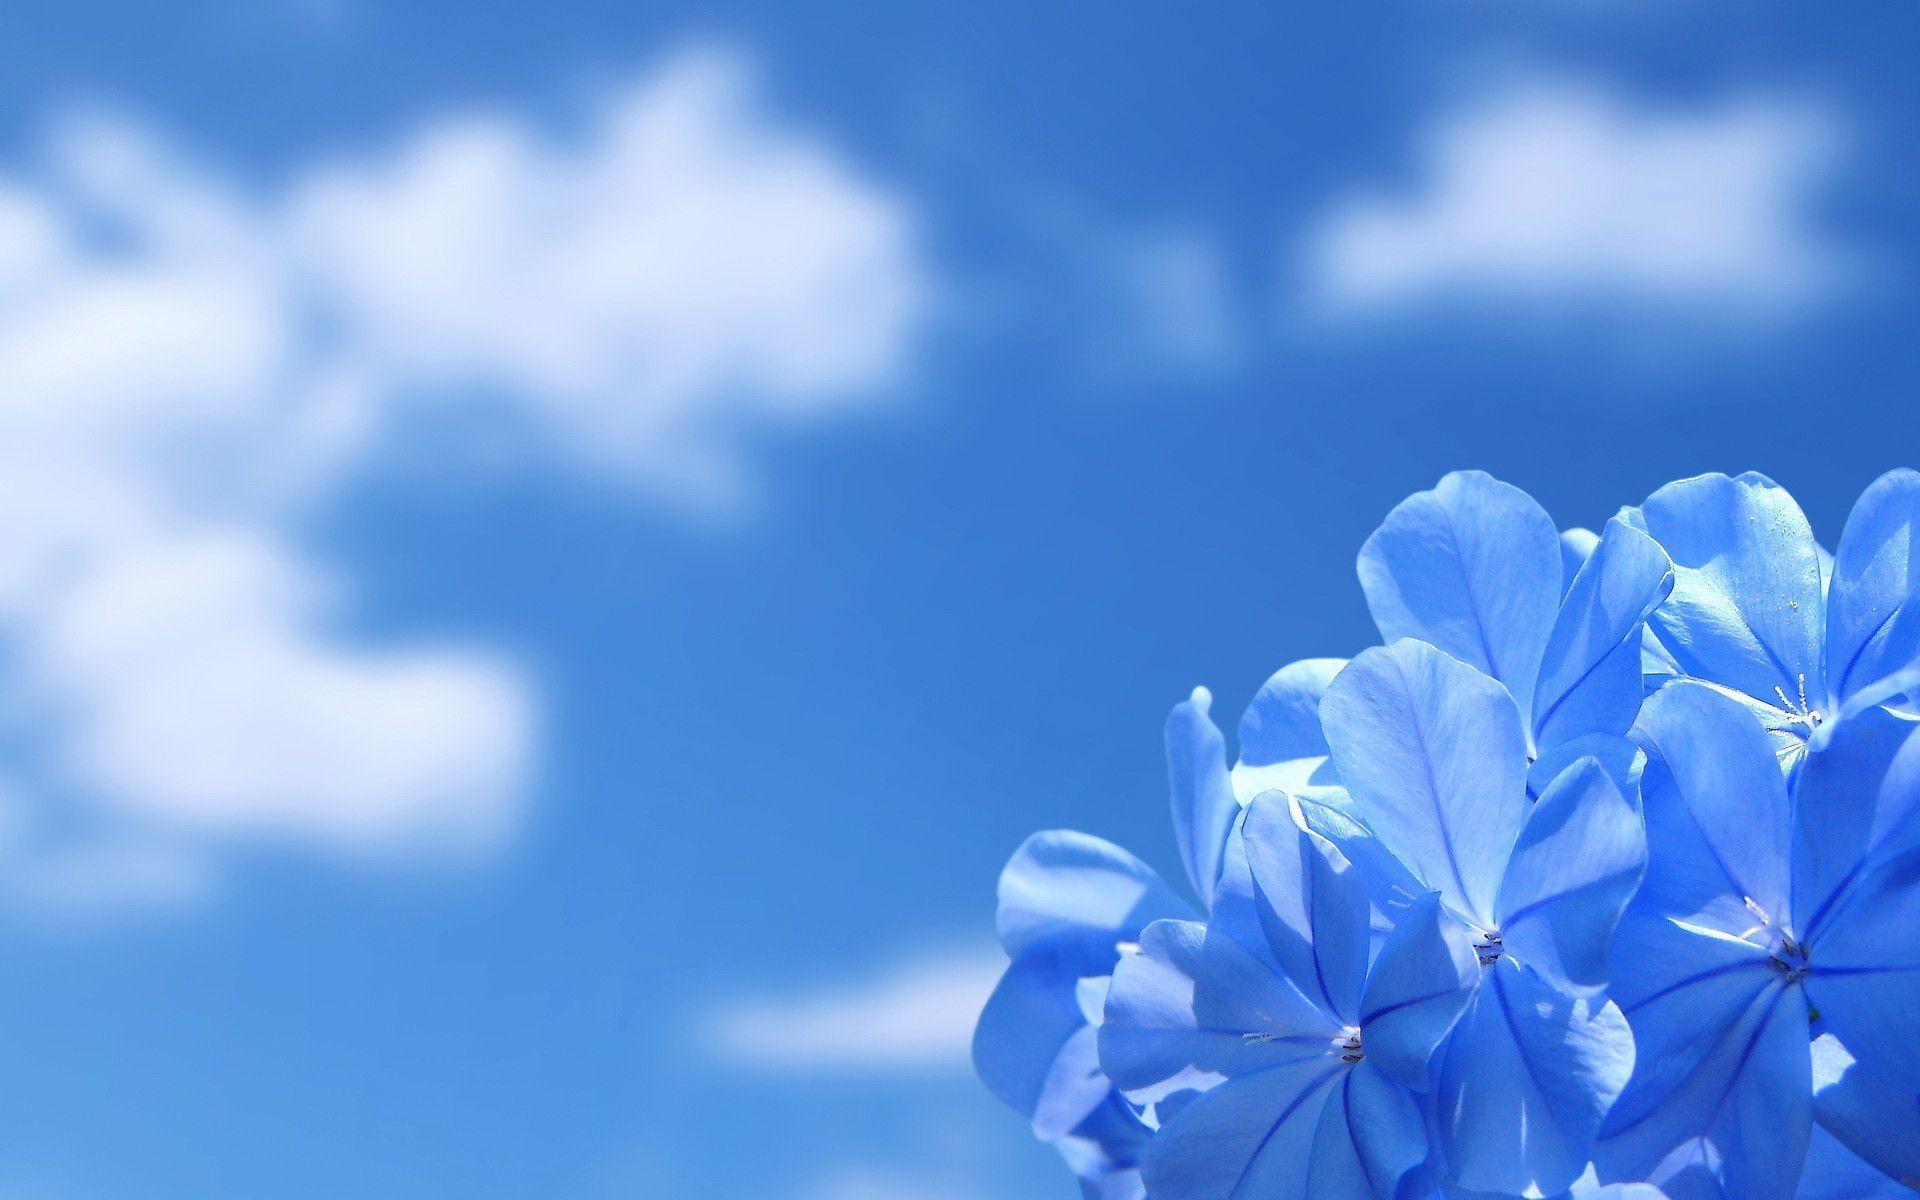 Mind Blowing Download Nice Blue Flowers 1920x1200PX Background